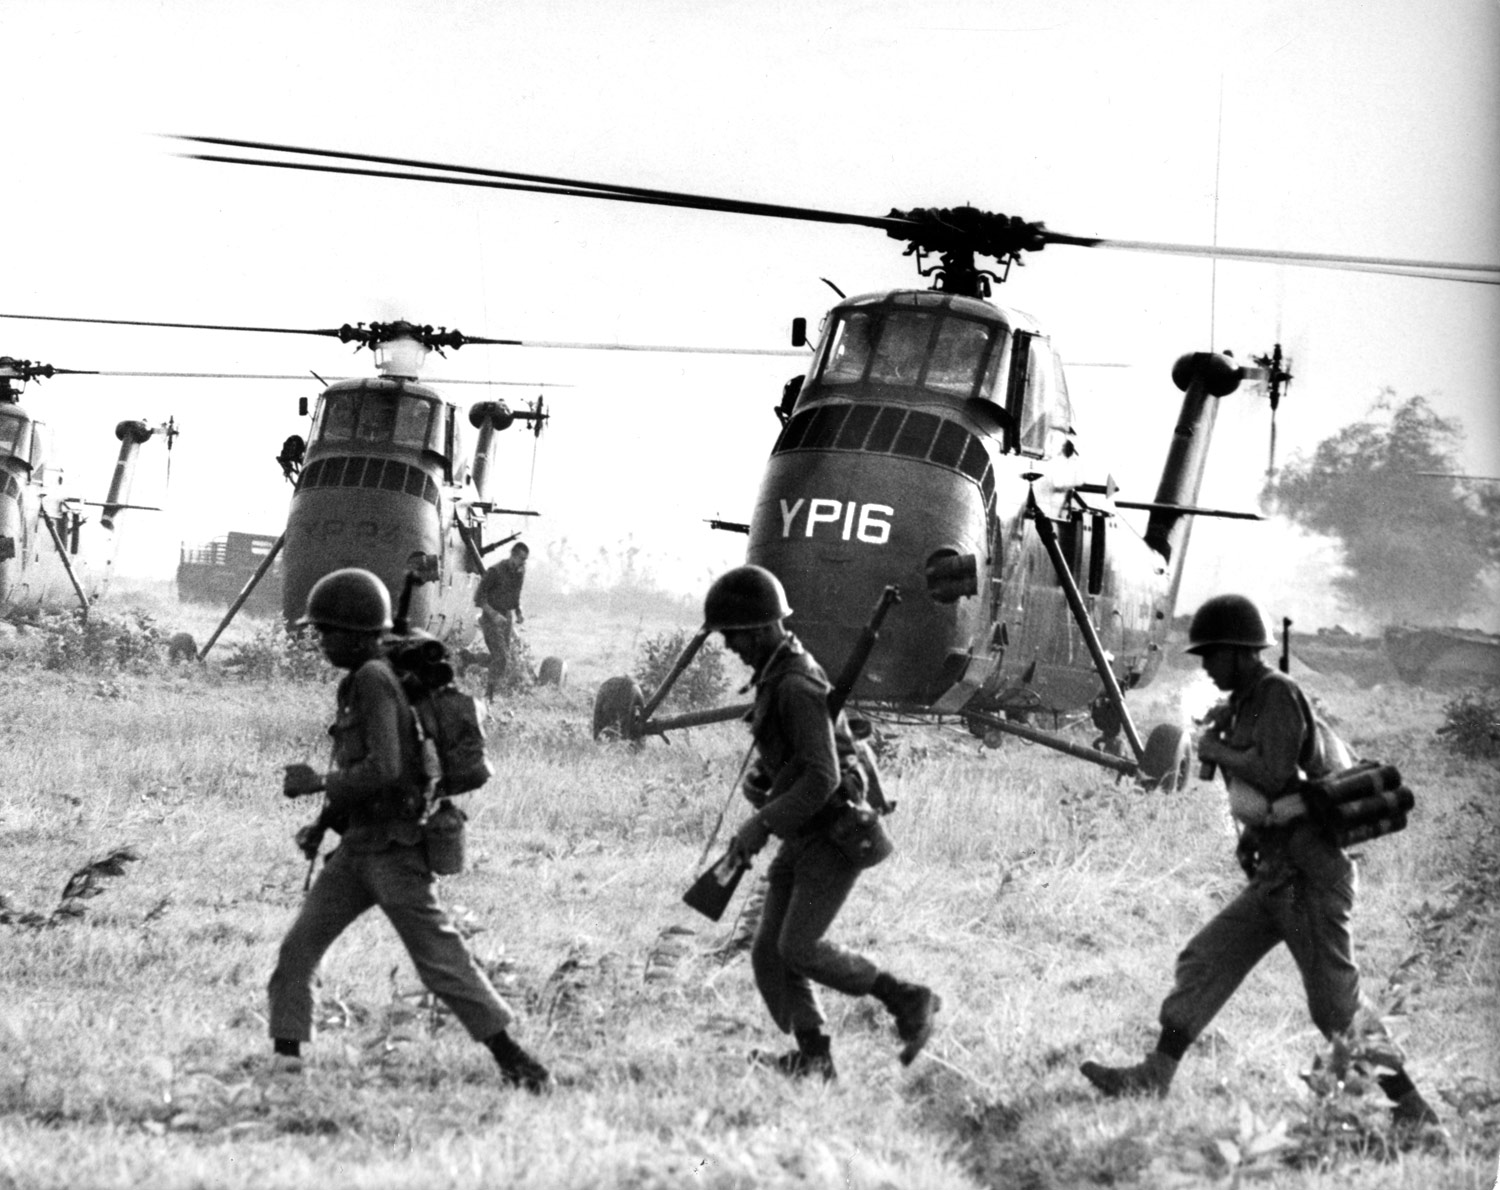 Not published in LIFE. A Larry Burrows photograph from Vietnam, March, 1965, not published in the original  Yankee Papa 13  LIFE photo essay.